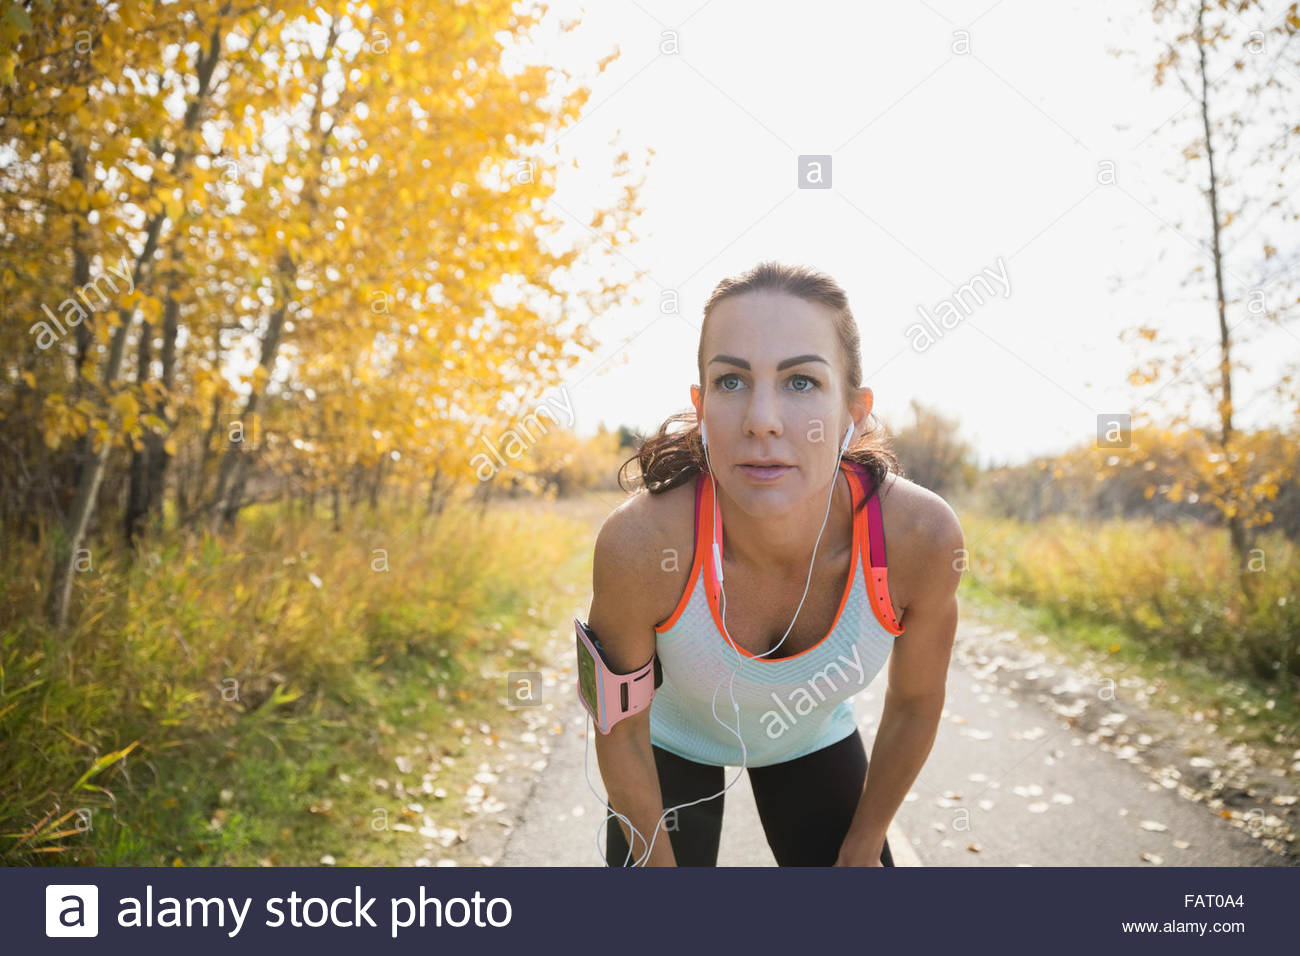 Jogger resting with hands on knees on autumn path Stock Photo